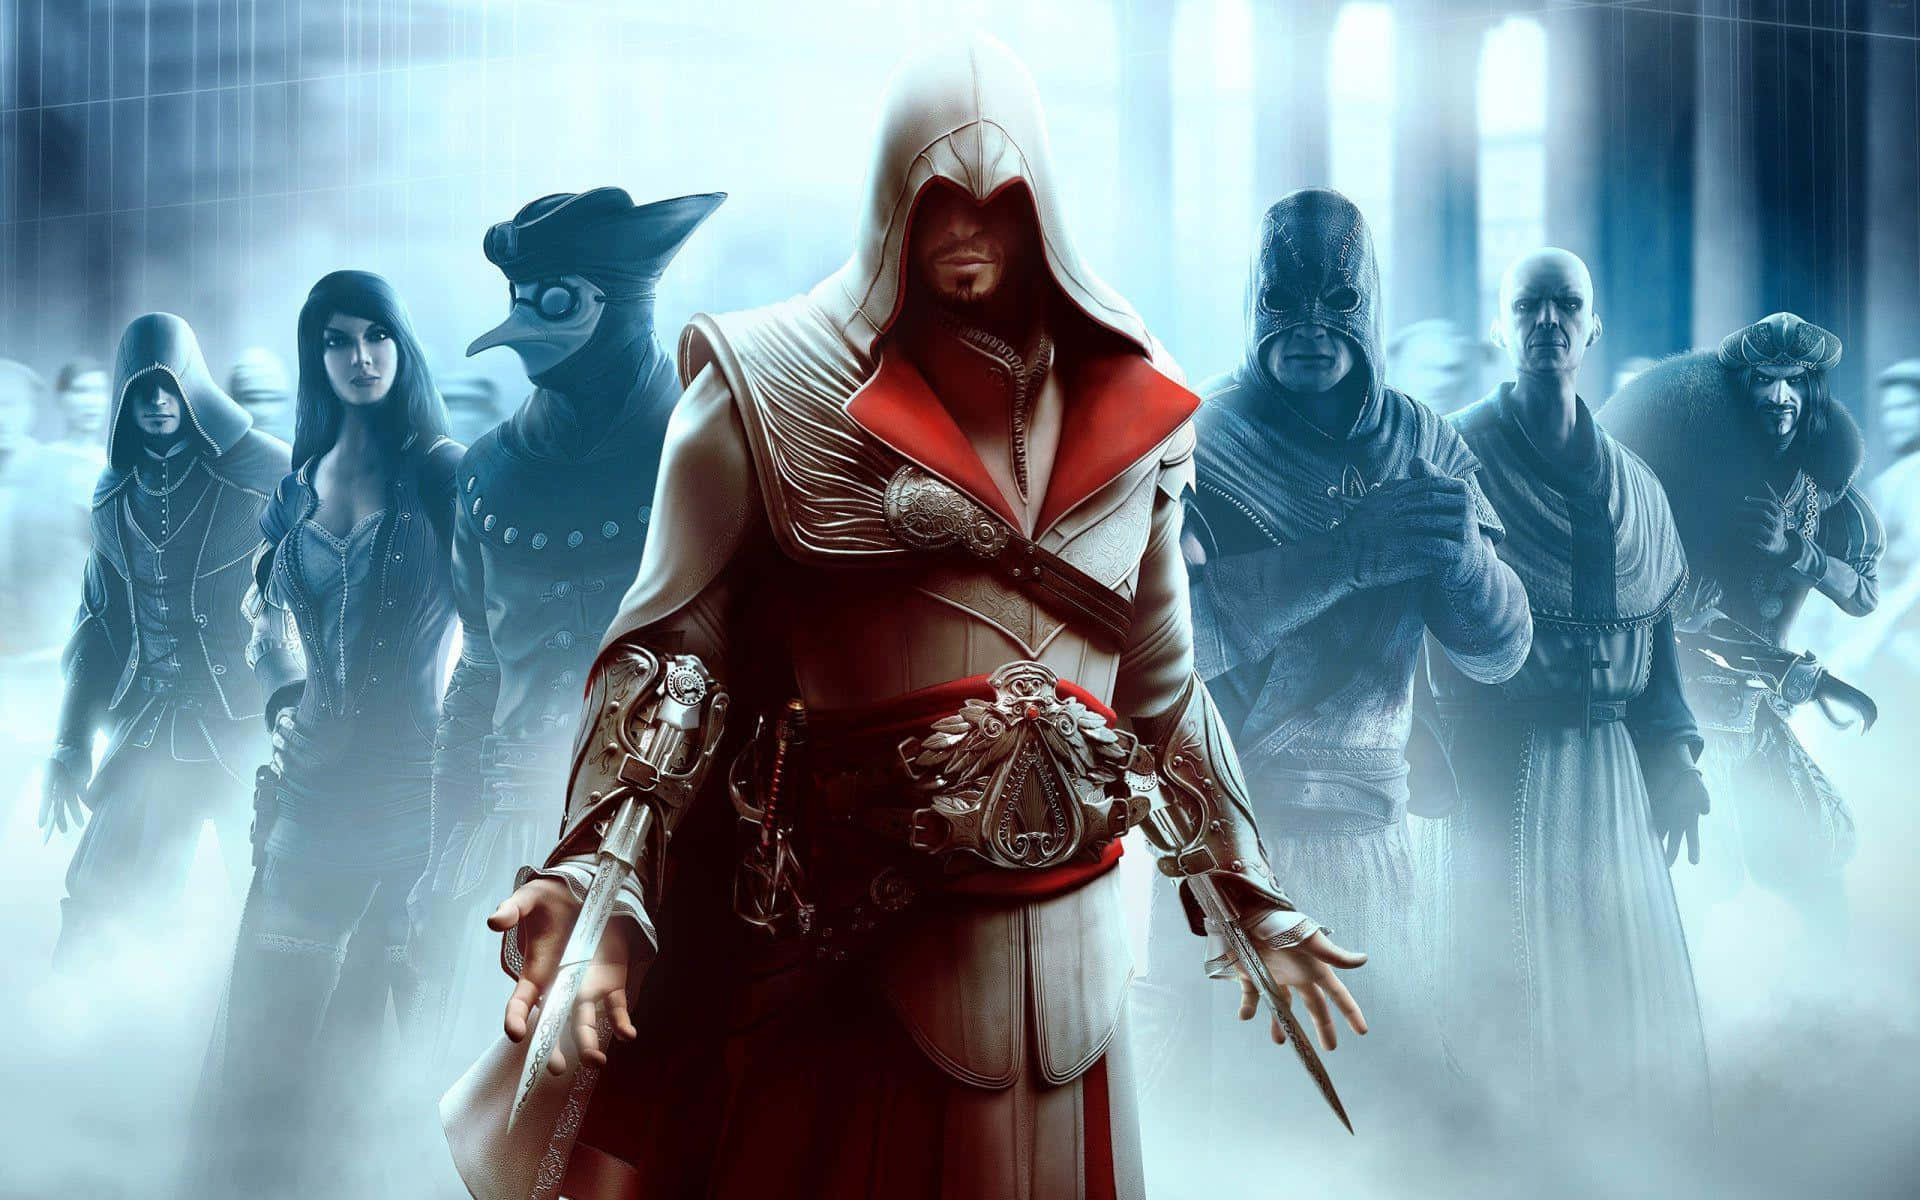 Assassin's Creed Brotherhood - Epic Confrontation Wallpaper